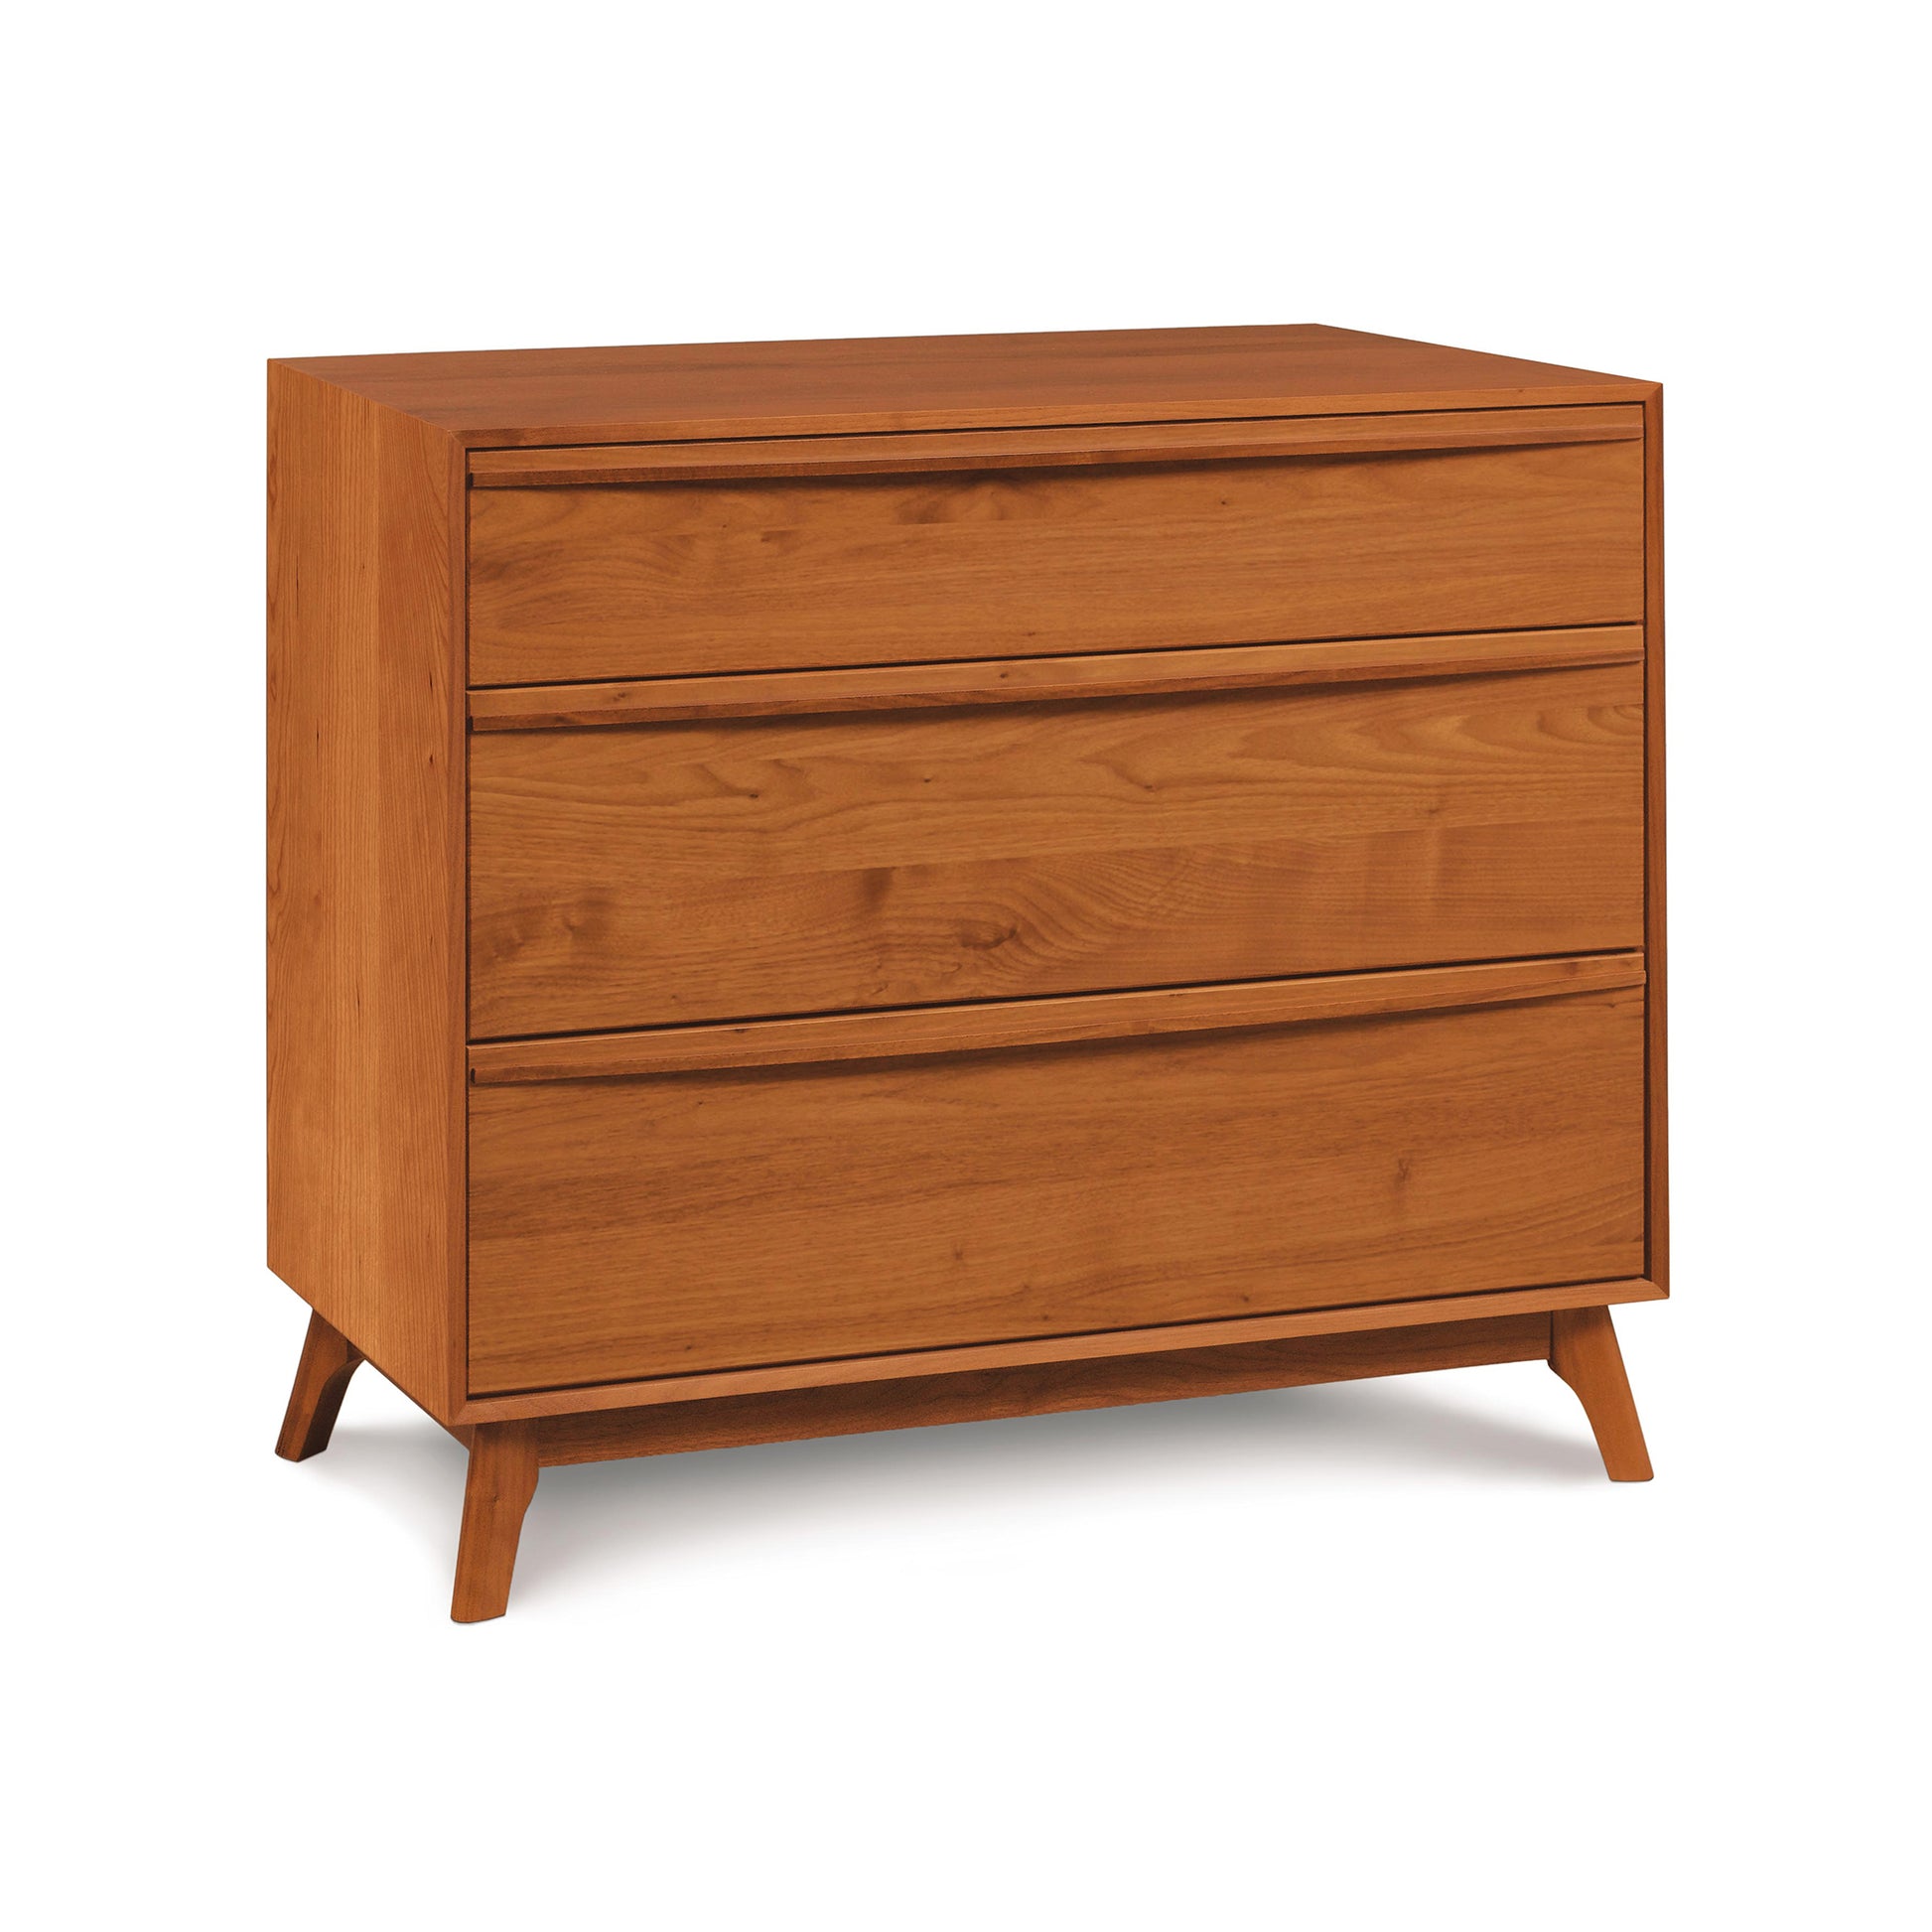 The Copeland Furniture Catalina 3-Drawer Chest, a modern bedroom essential made of hardwood, displayed on a white background.